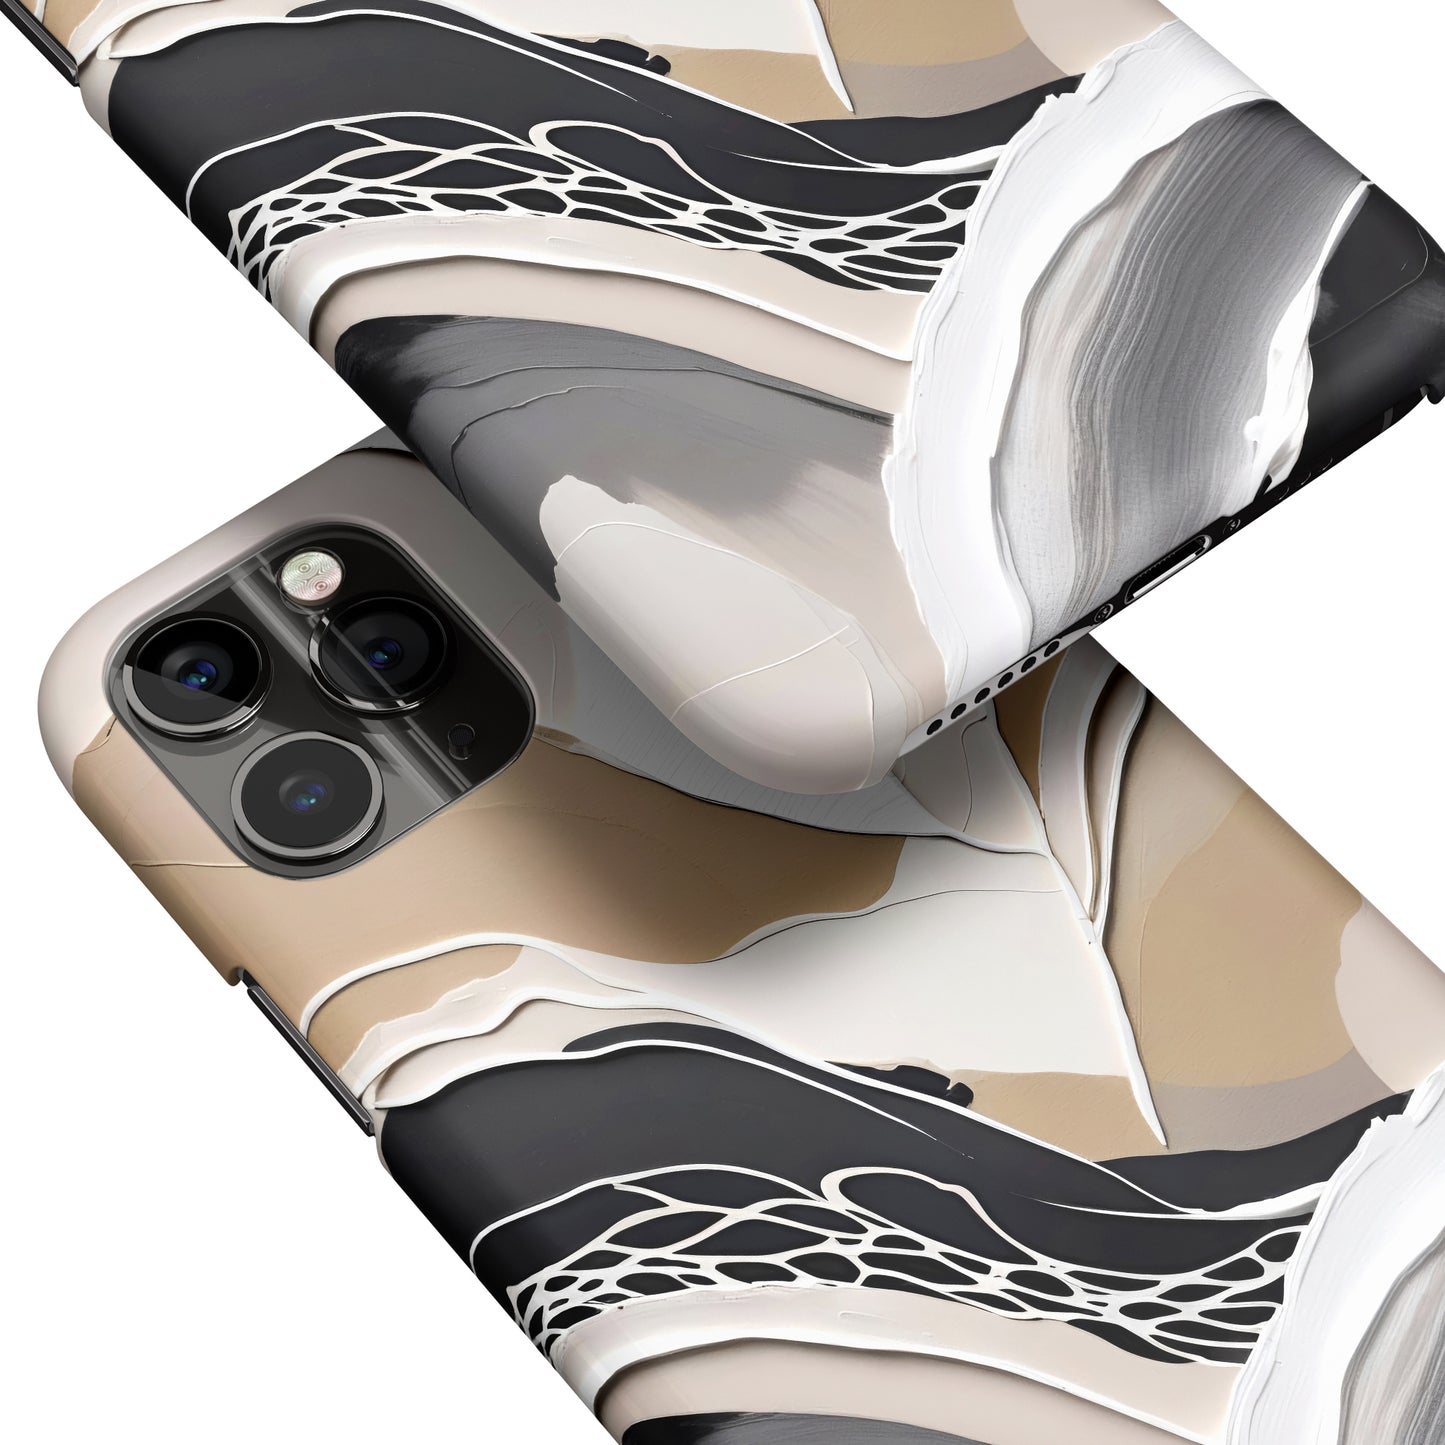 Abstract Flora Beige iPhone Case